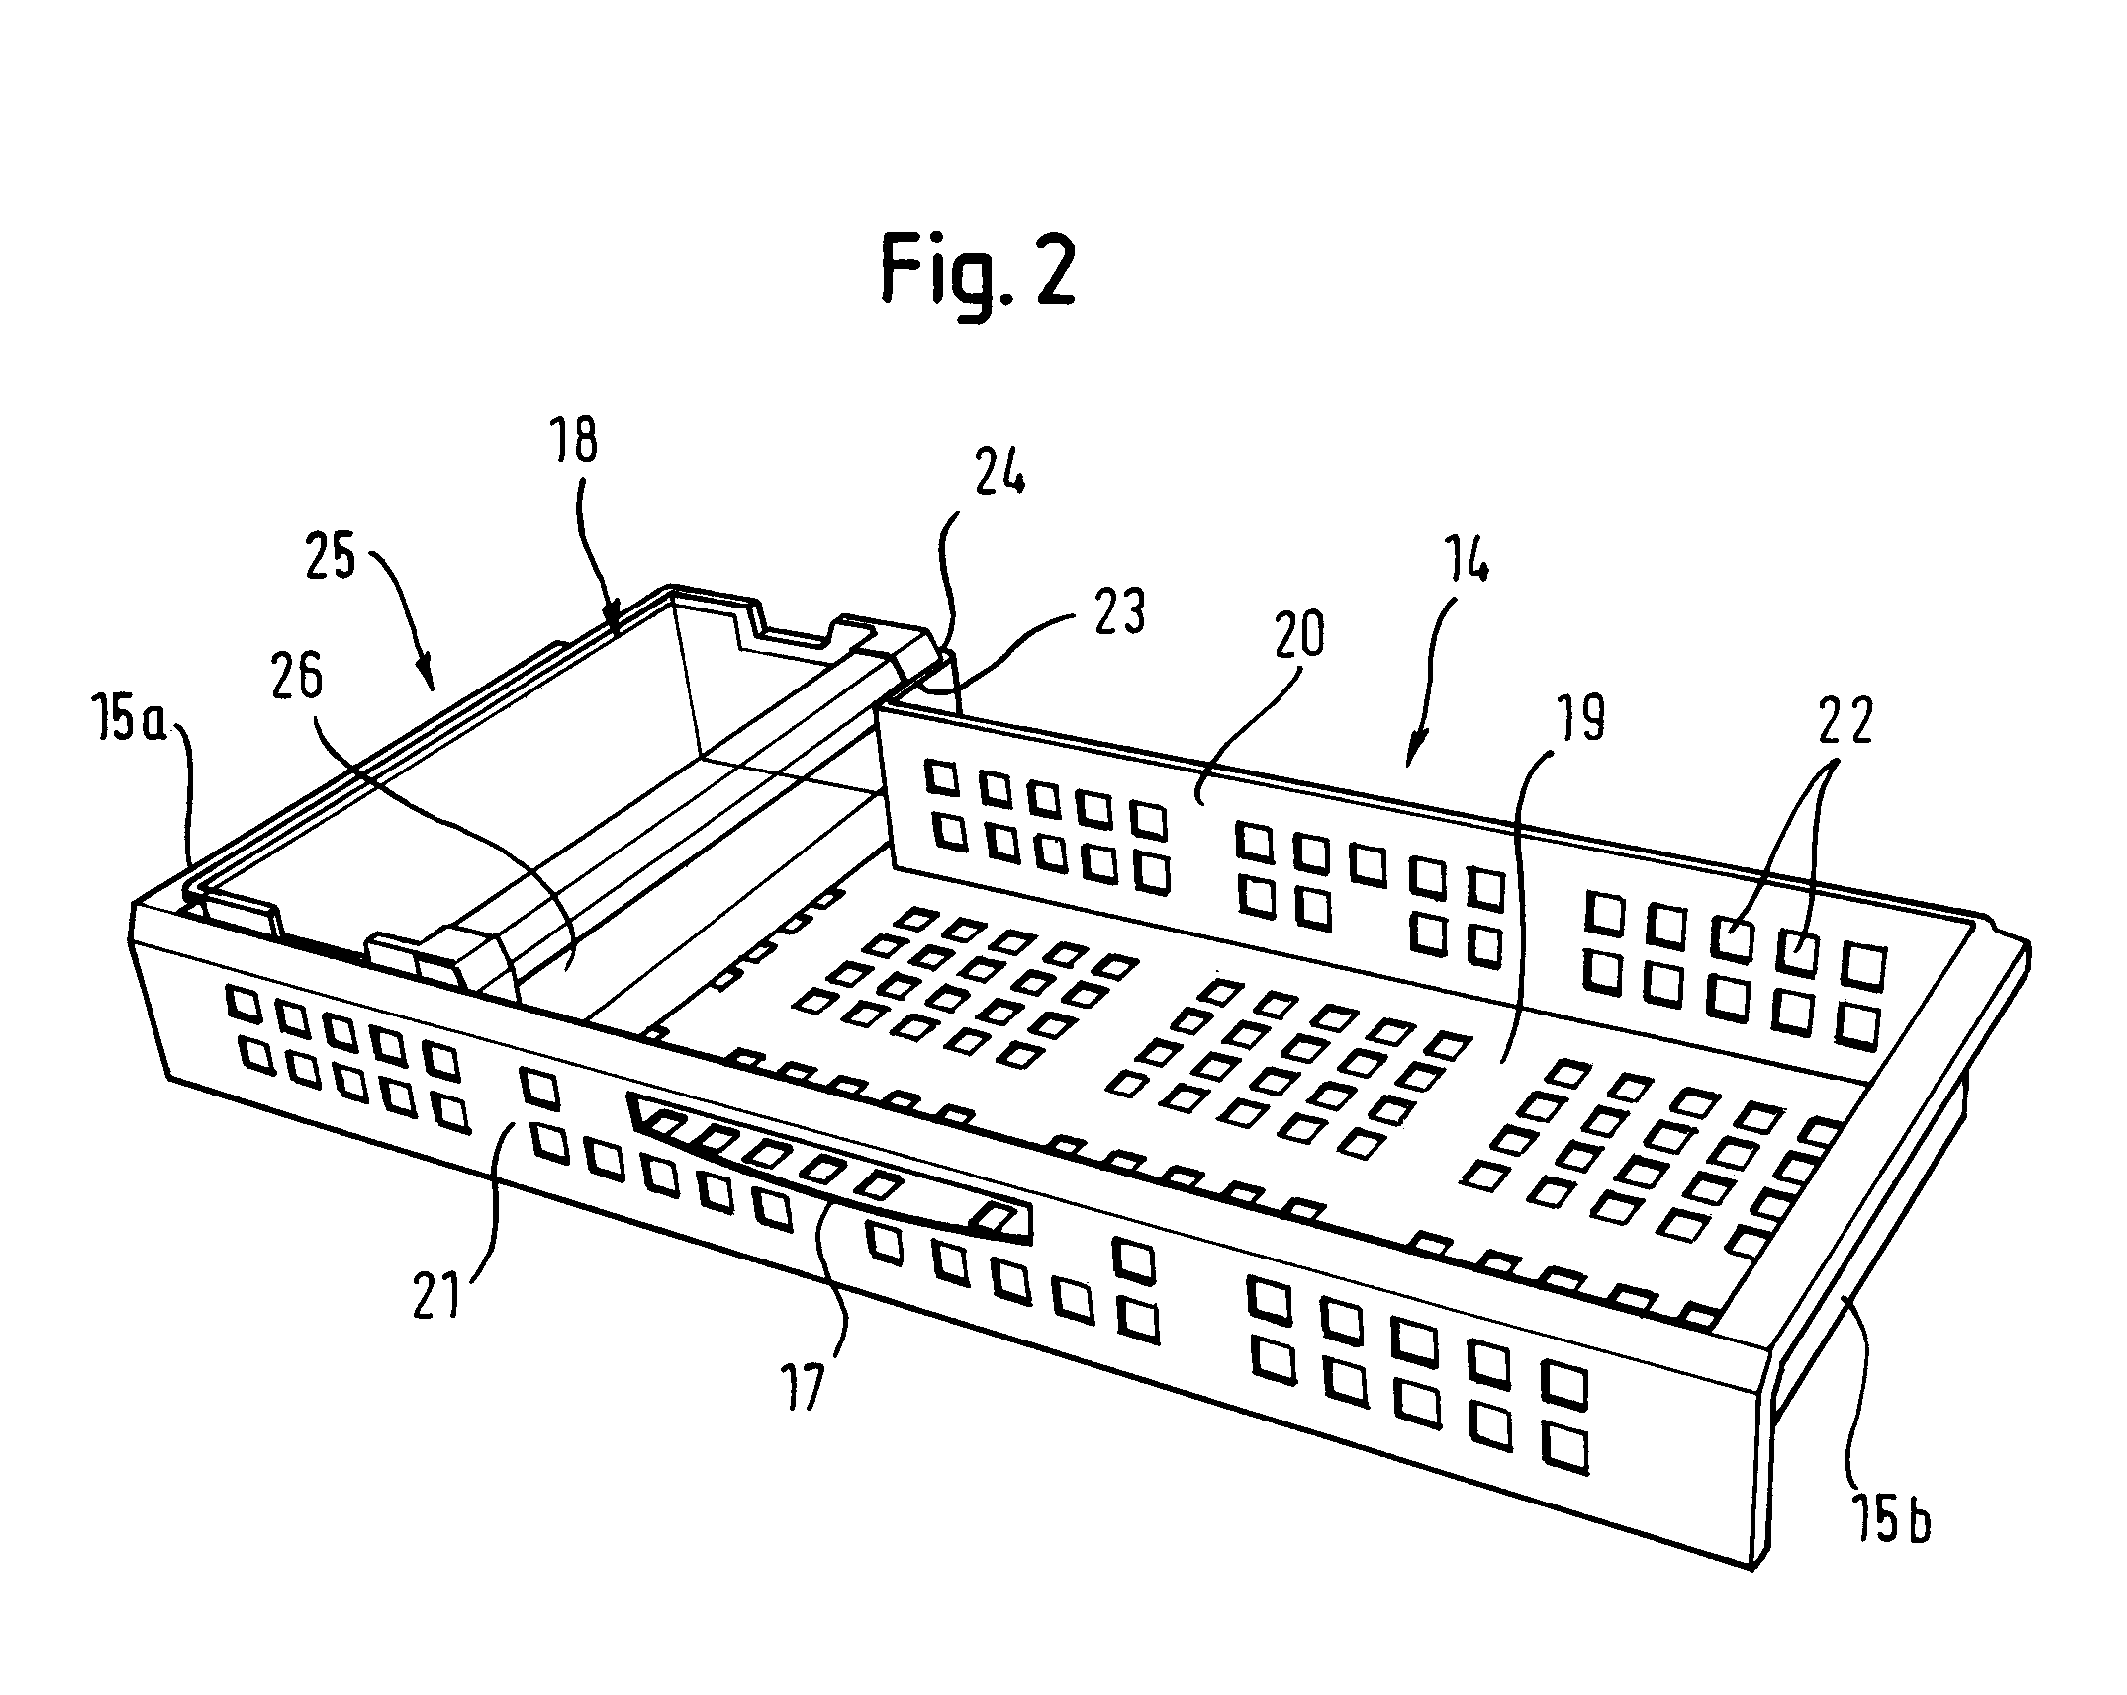 Ice cube container of an ice maker for household purposes, and refrigeration appliance comprising such an ice cube container